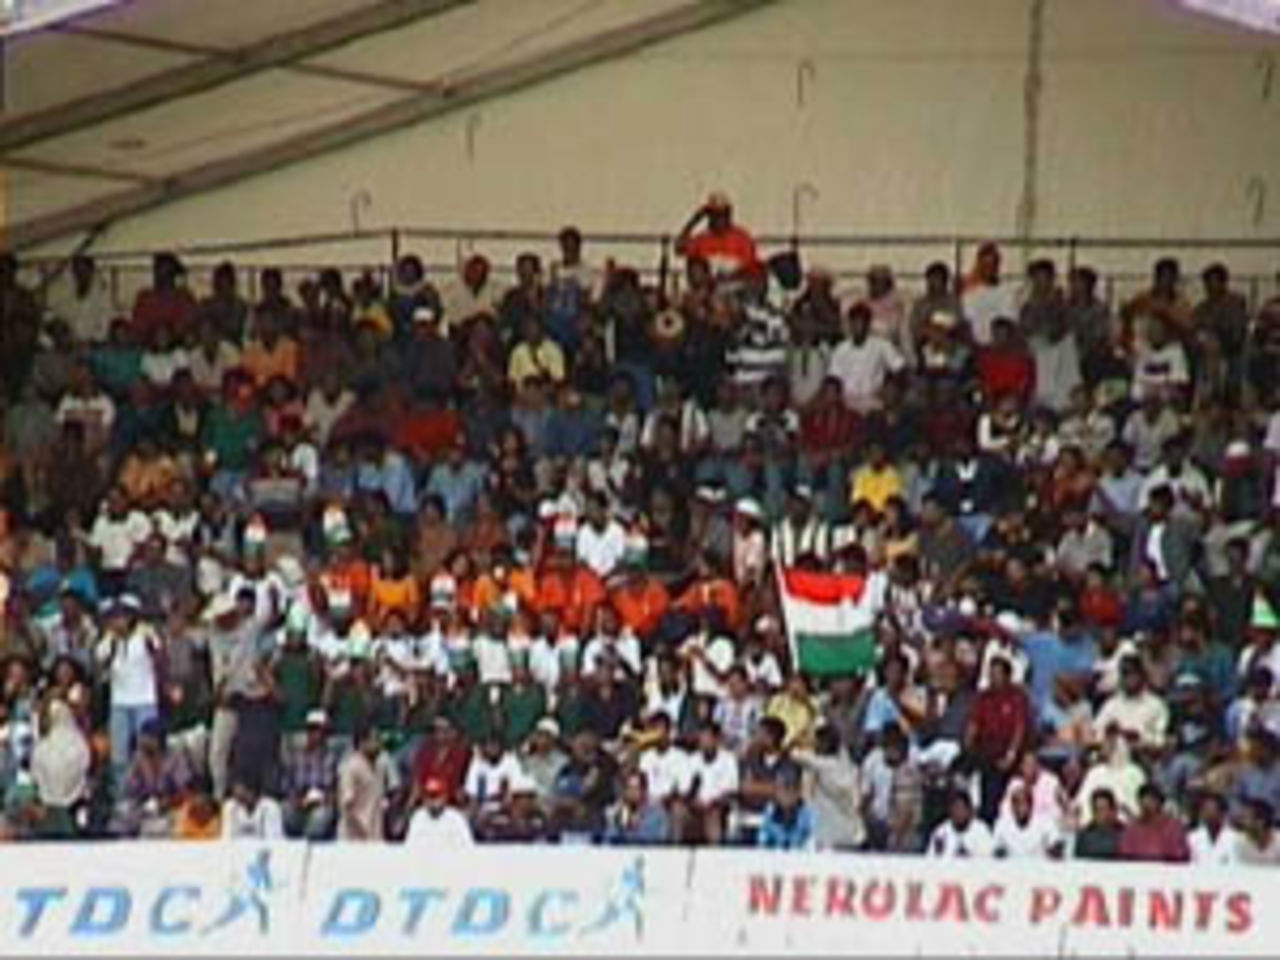 A section of the Indian supporters, waving the tri-colour flag, India v Zimbabwe (2nd ODI), Coca-Cola Singapore Challenge, 1999-2000, Kallang Ground, Singapore, 4 Sep 1999